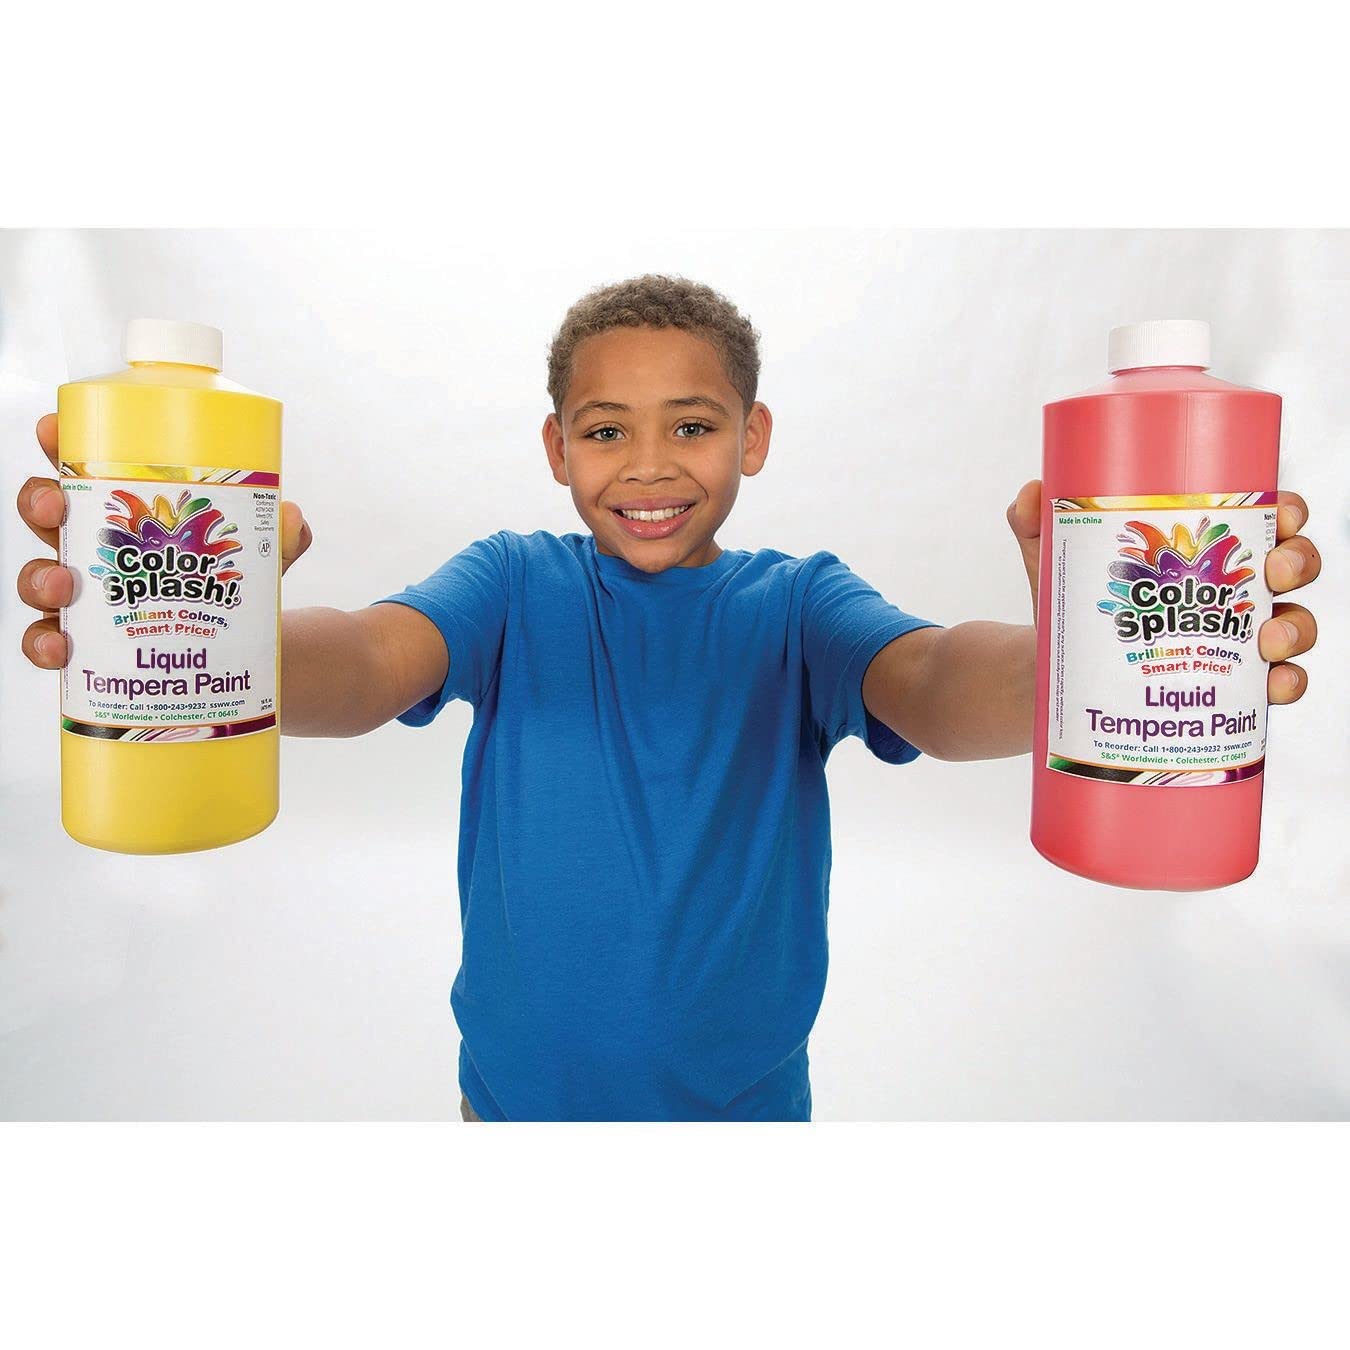 S&S Worldwide Color Splash! Liquid Tempera Bulk Paint, Set of 12 in 11 Bright Colors, 32-oz Easy-Pour Bottles, Great for Arts & Crafts, School, Classroom, Poster Paint, For Kids & Adults, Non-Toxic.